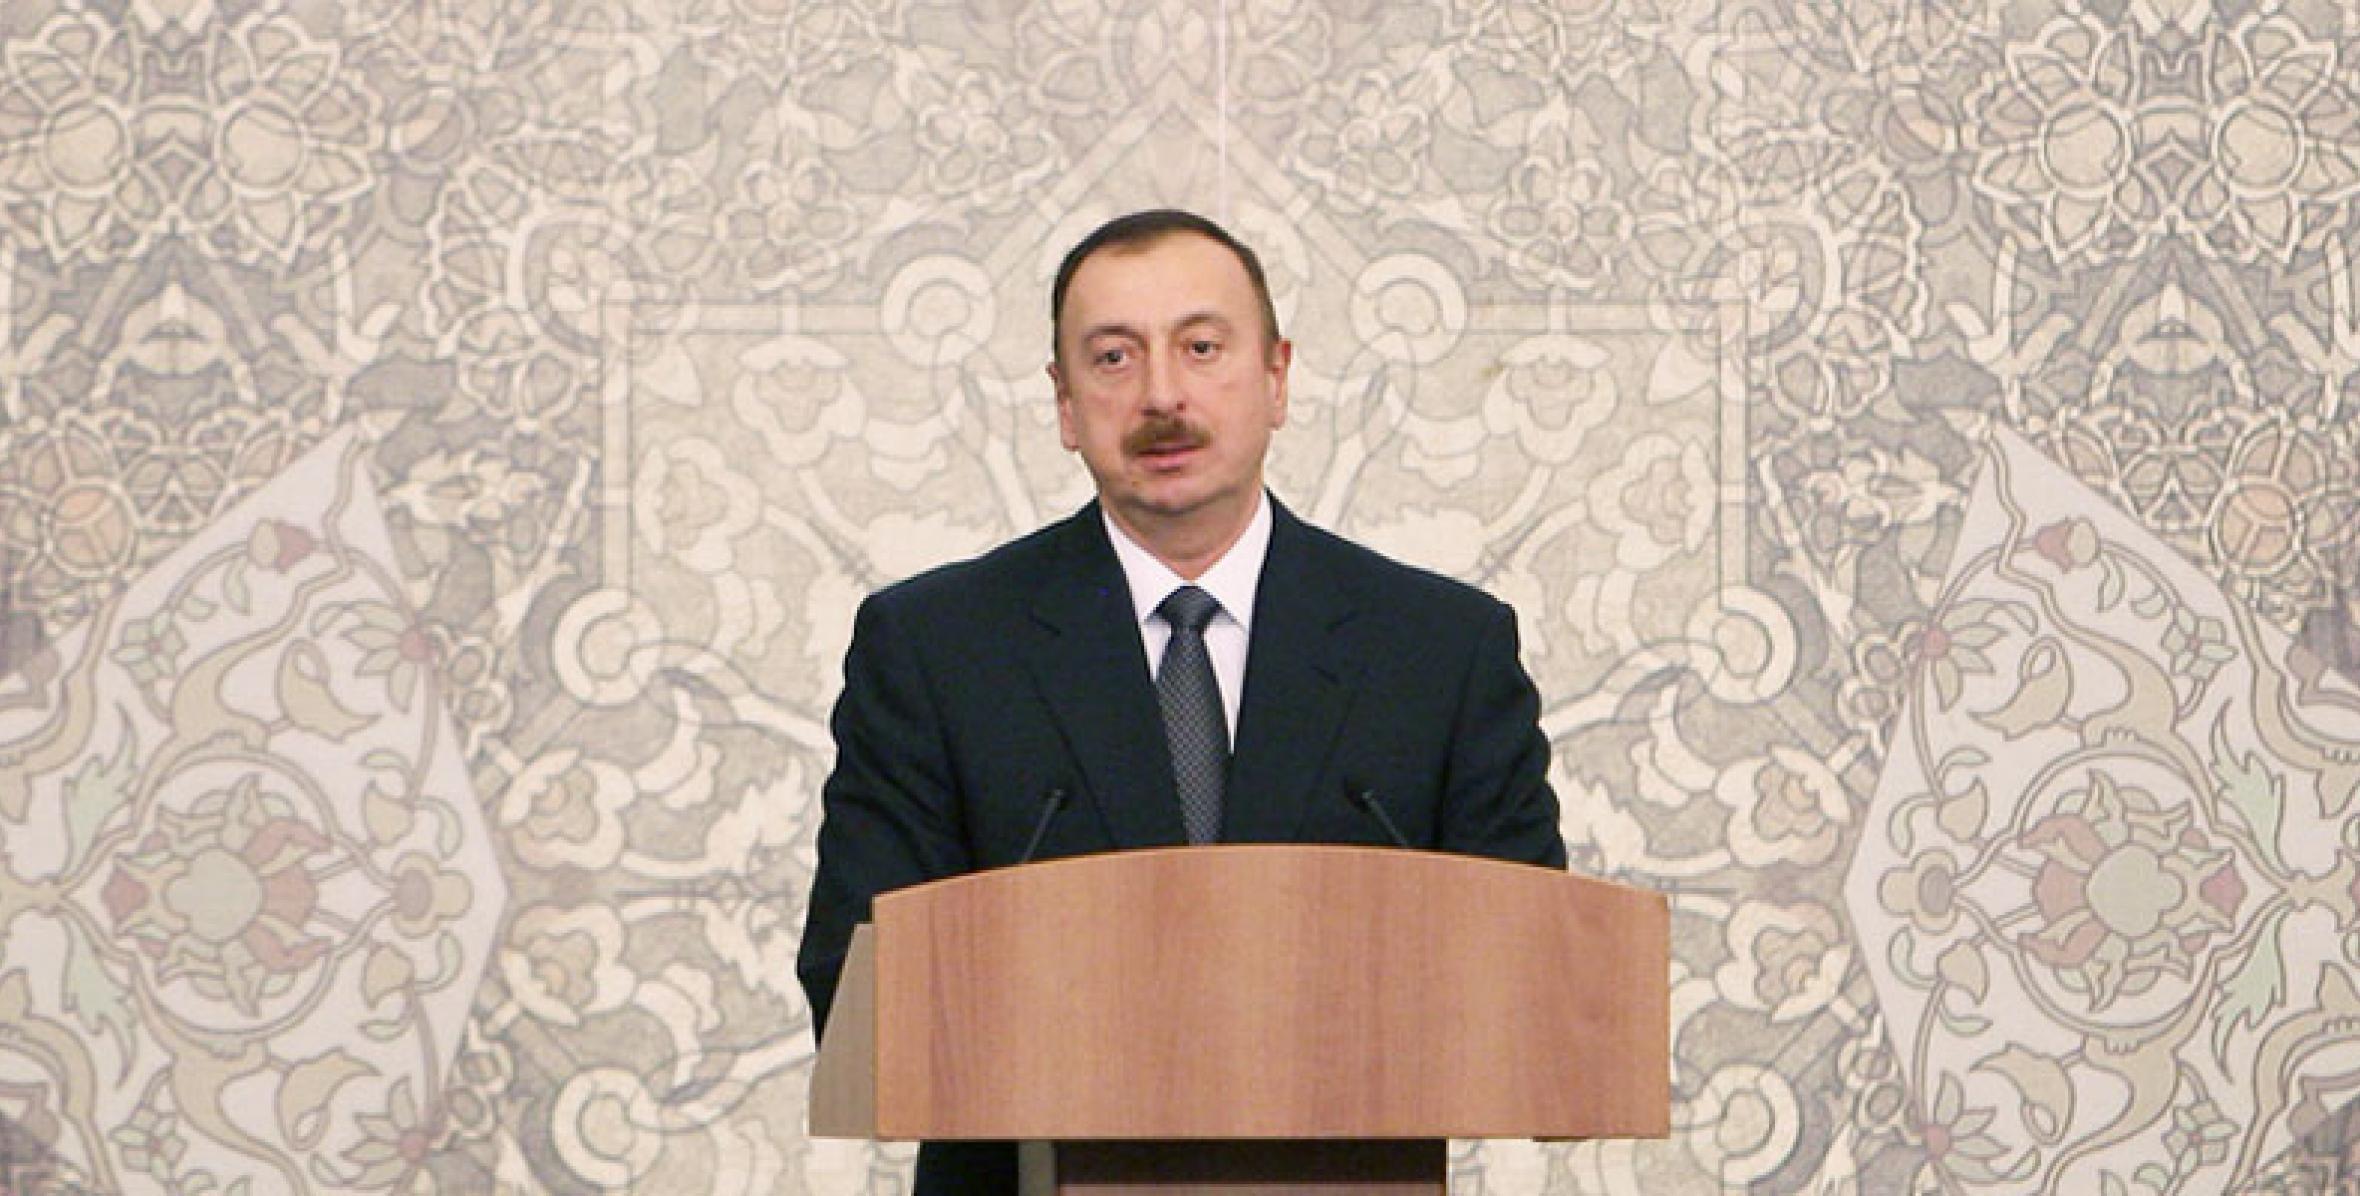 Speech by Ilham Aliyev at the presentation of the "Friend of the Journalists" Award